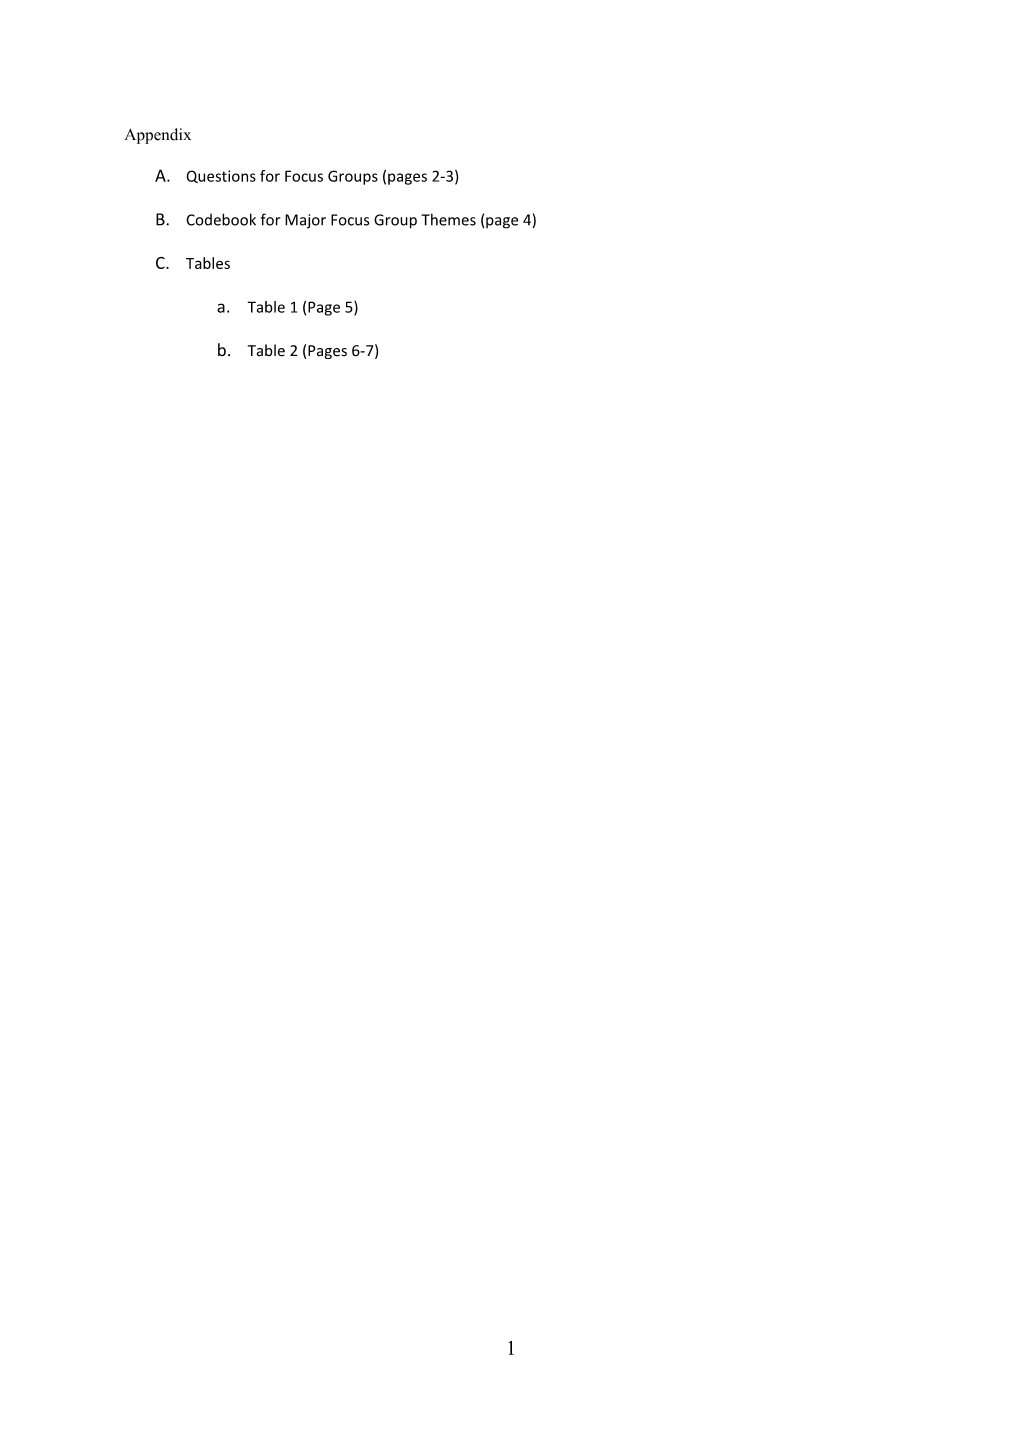 Codebook for Major Focus Group Themes (Page 4)